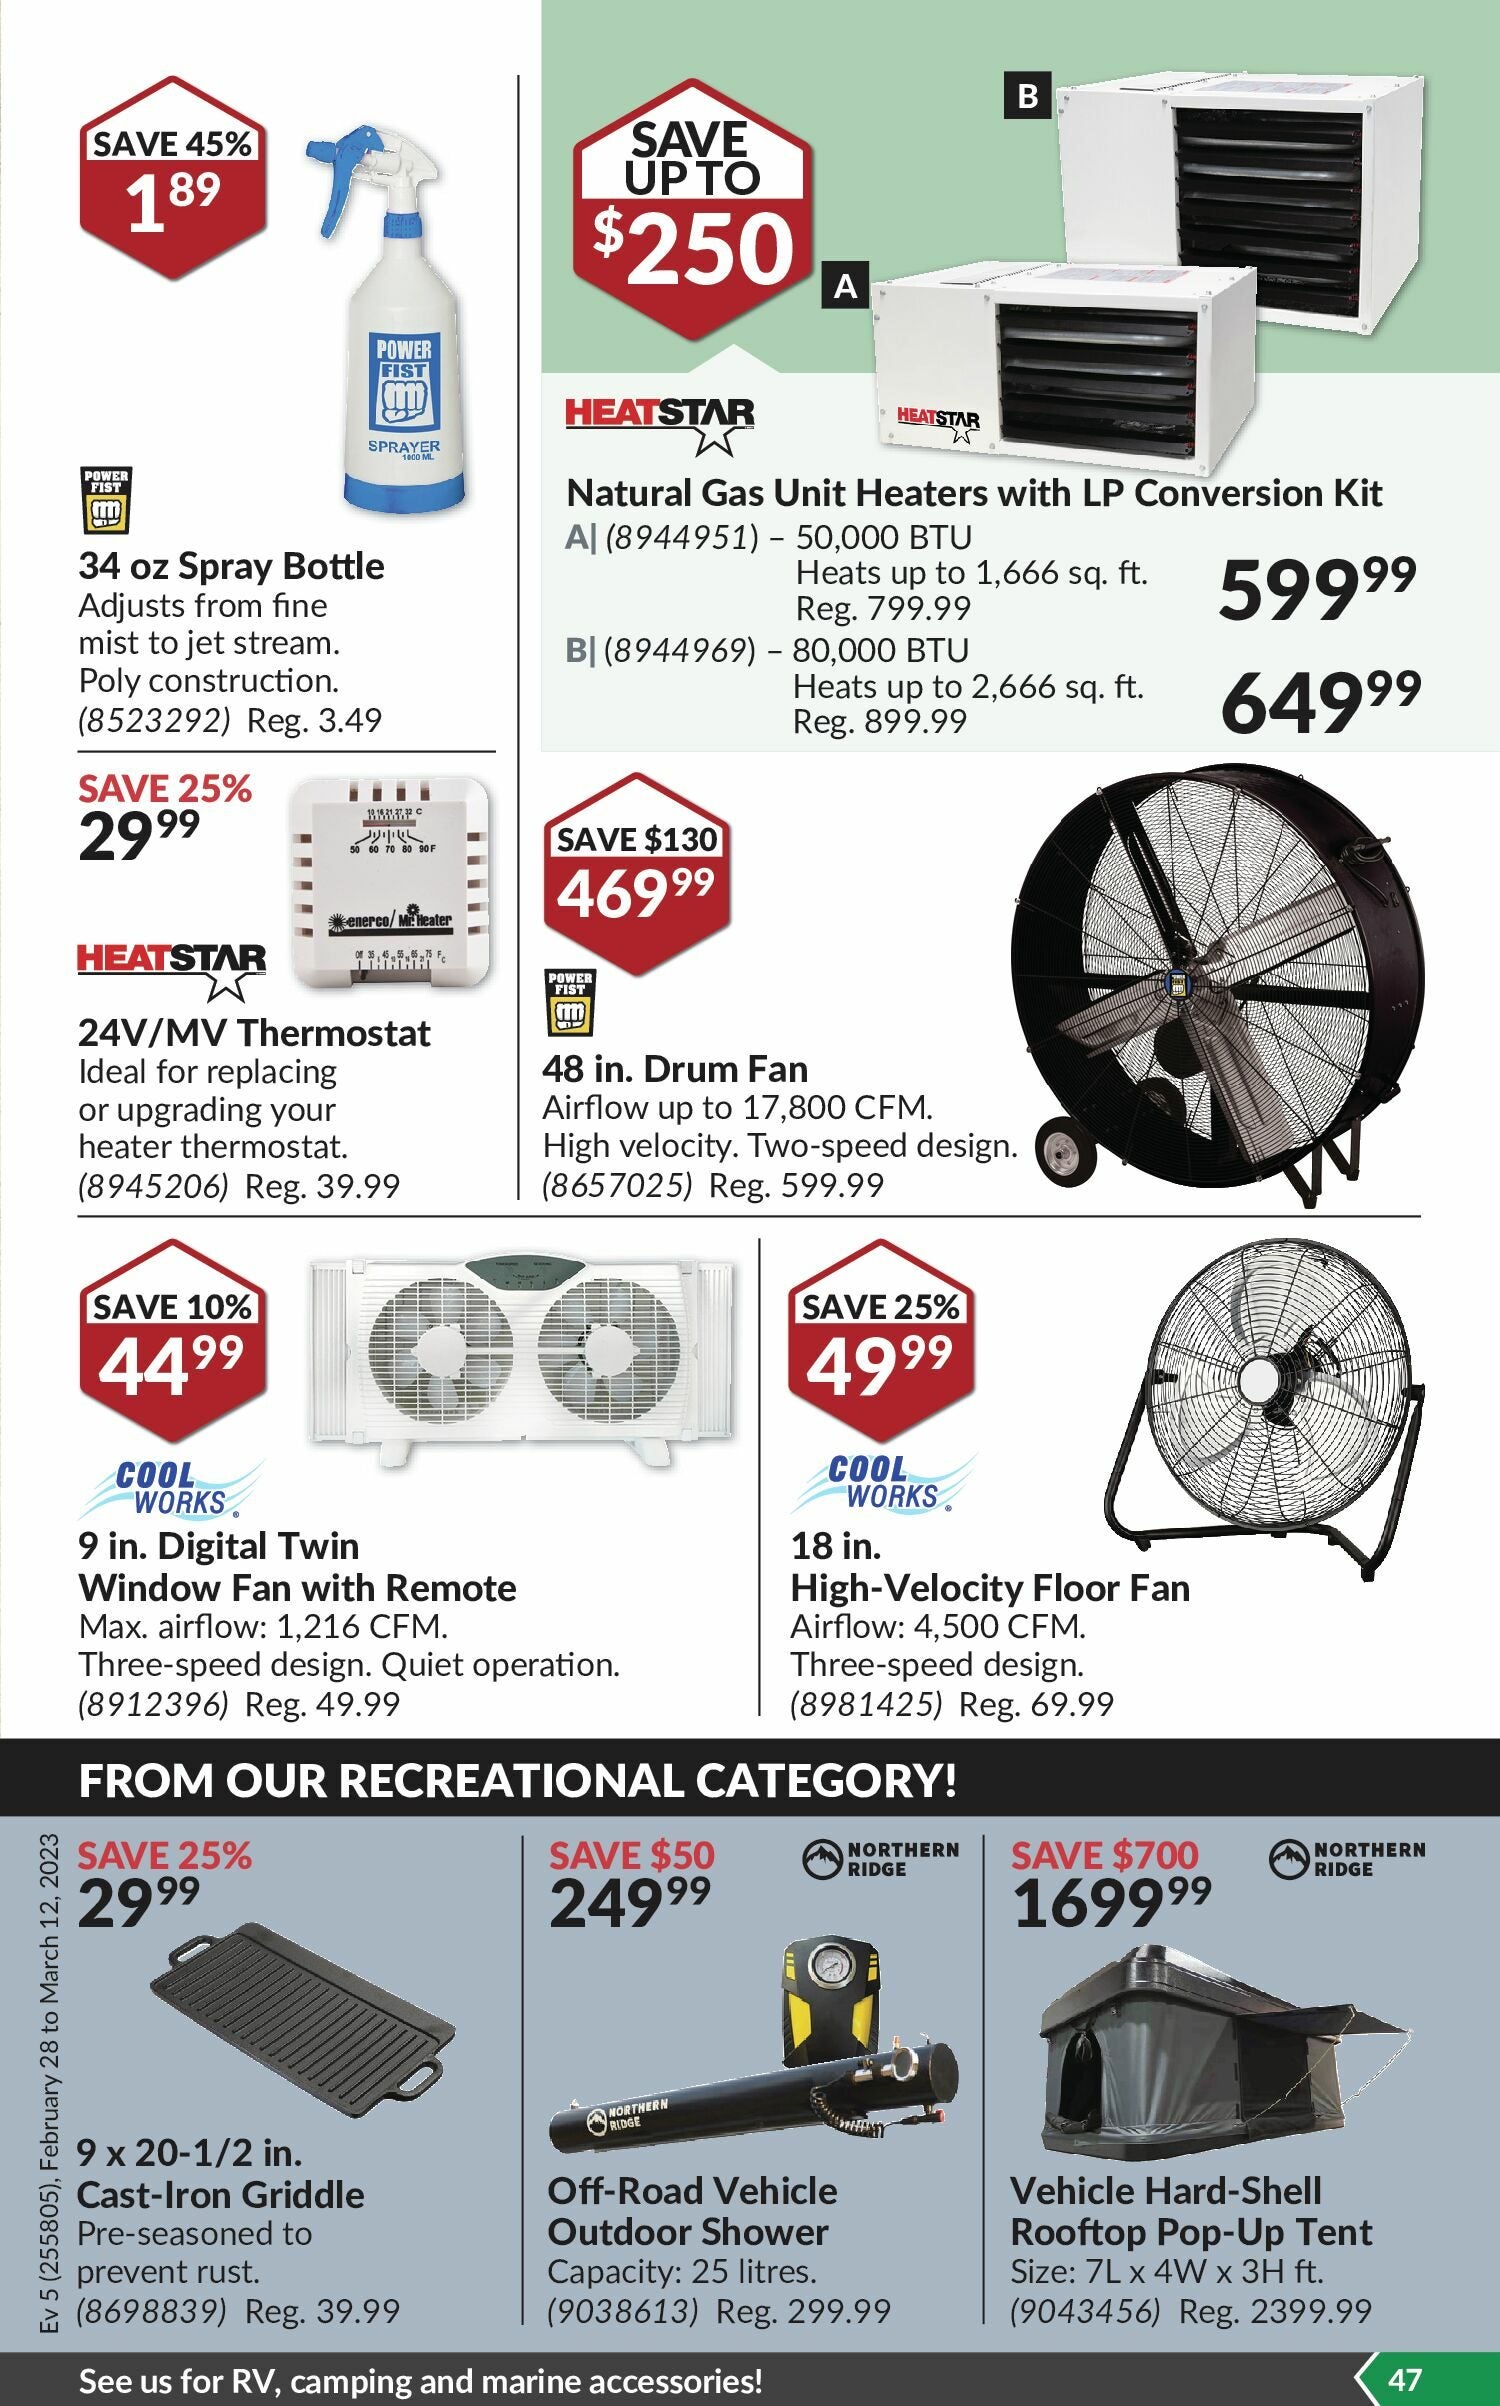 Princess Auto Weekly Flyer - 2 Week Sale - Bring Your Projects To Life -  Feb 28 – Mar 12 